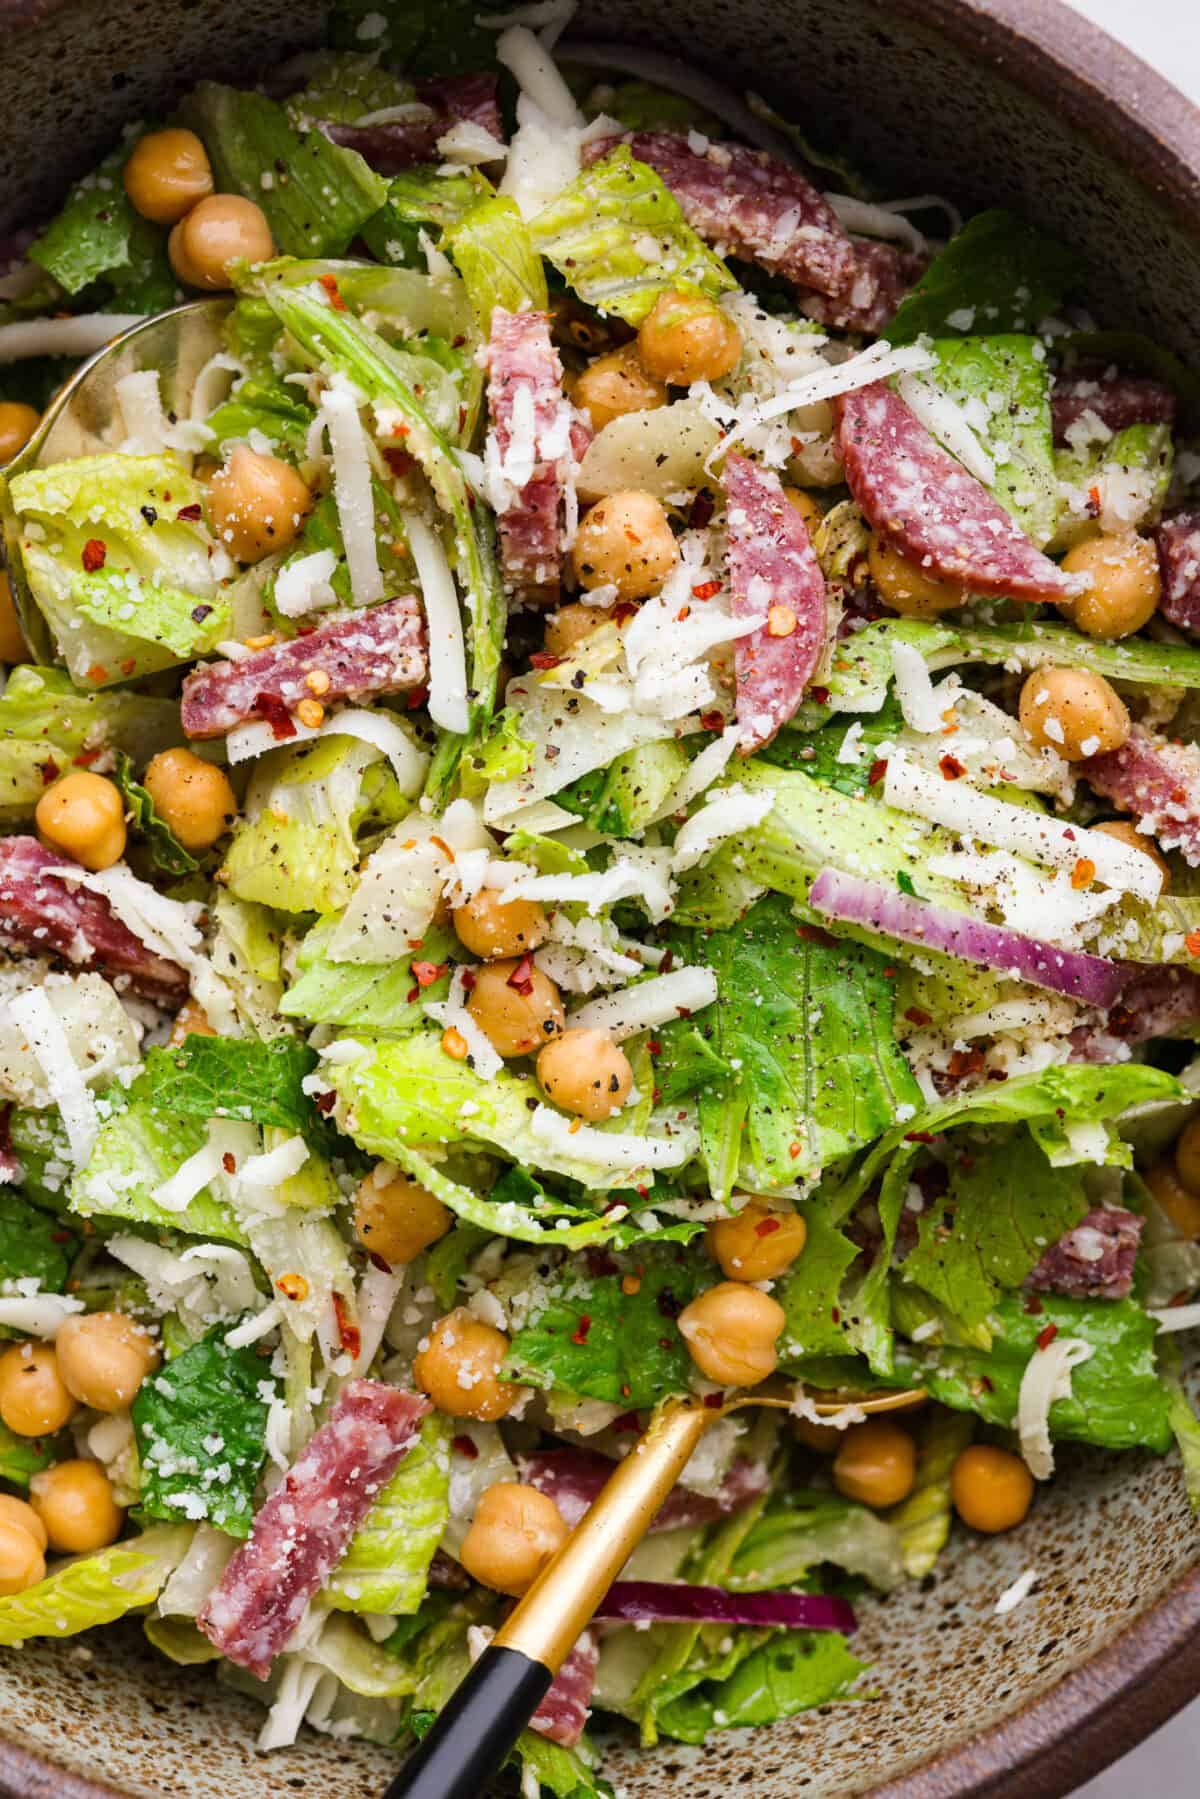 Closeup of salad made with salami, chickpeas, lettuce, and grated cheese.